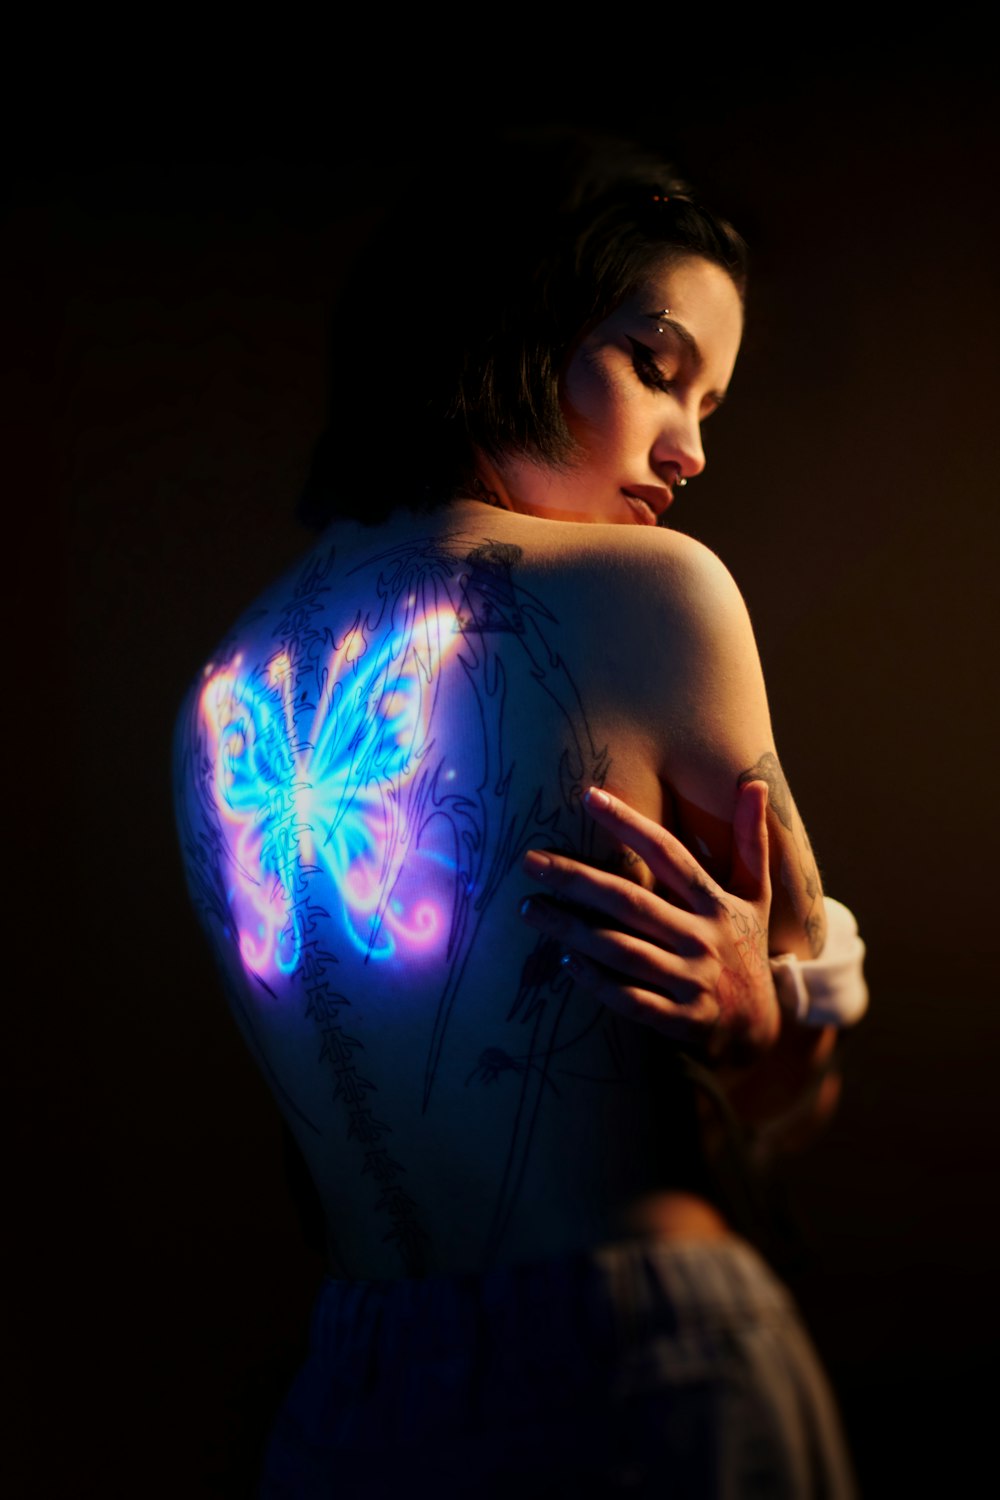 a woman with a butterfly tattoo on her back